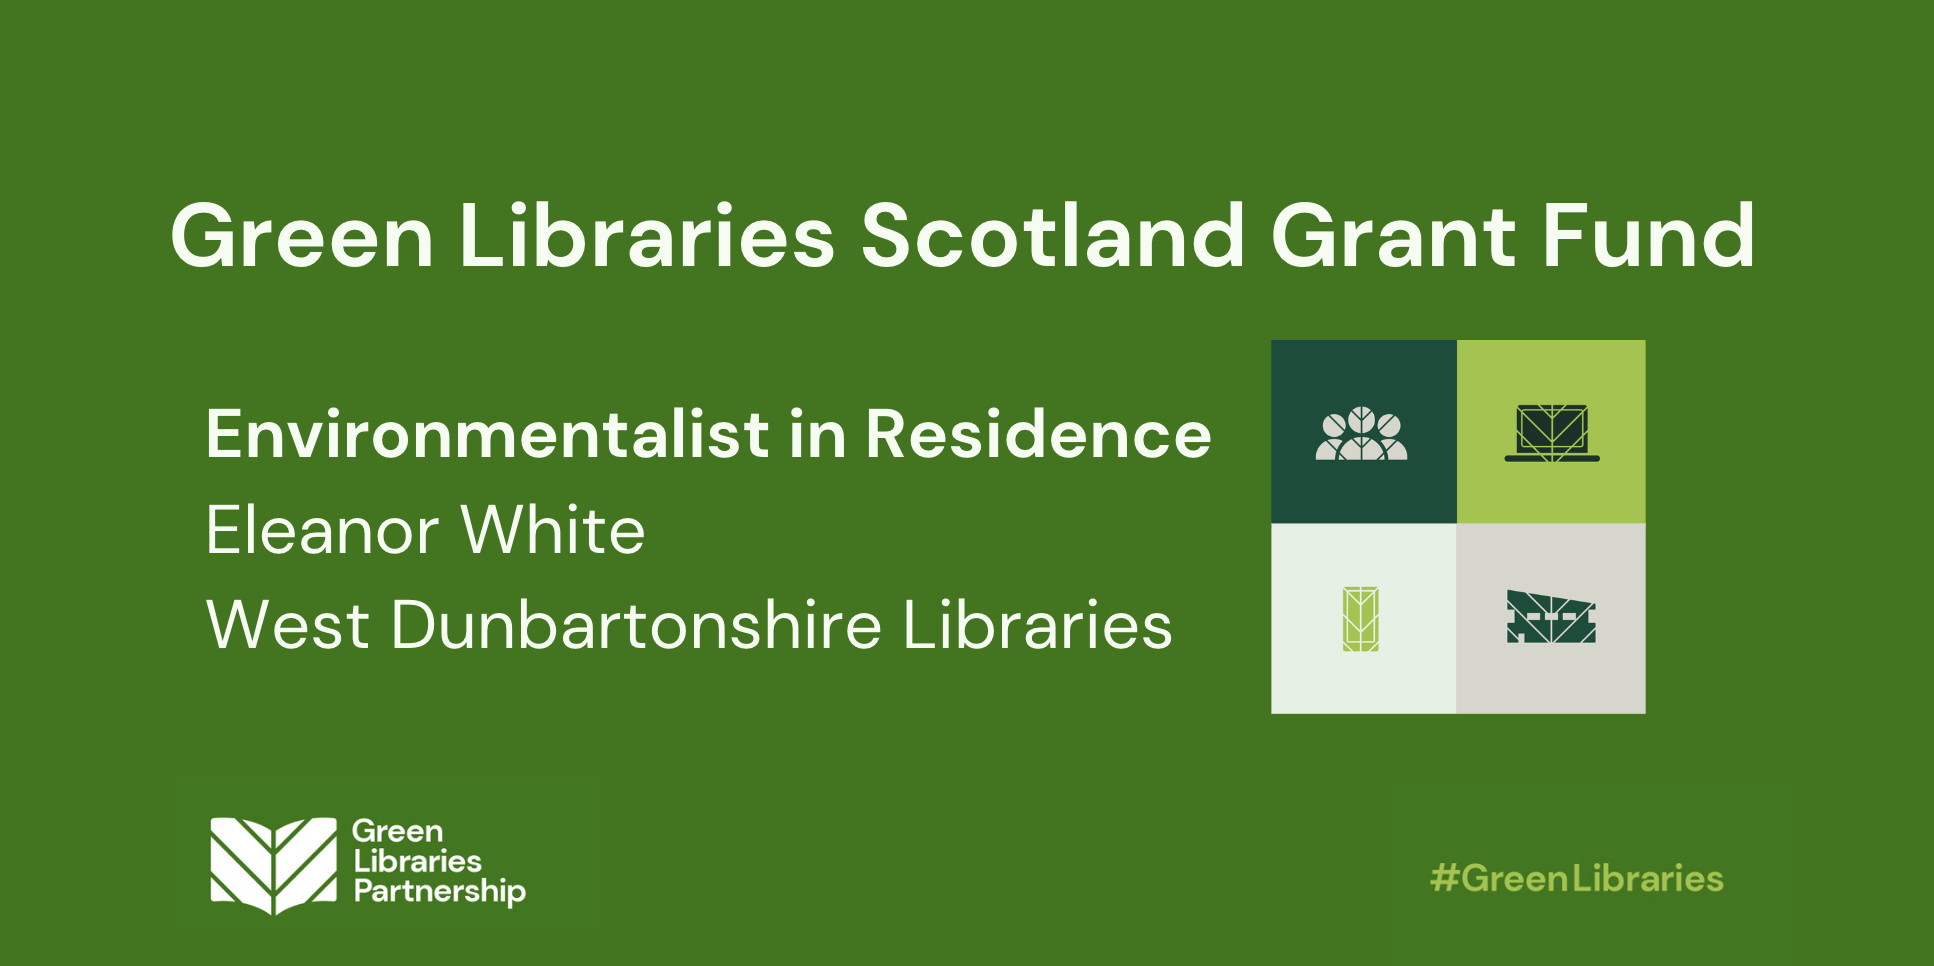 Green Library Scotland Grant Fund, Environmentalist in Residence, Eleanor White, West Dunbartonshire Libraries.